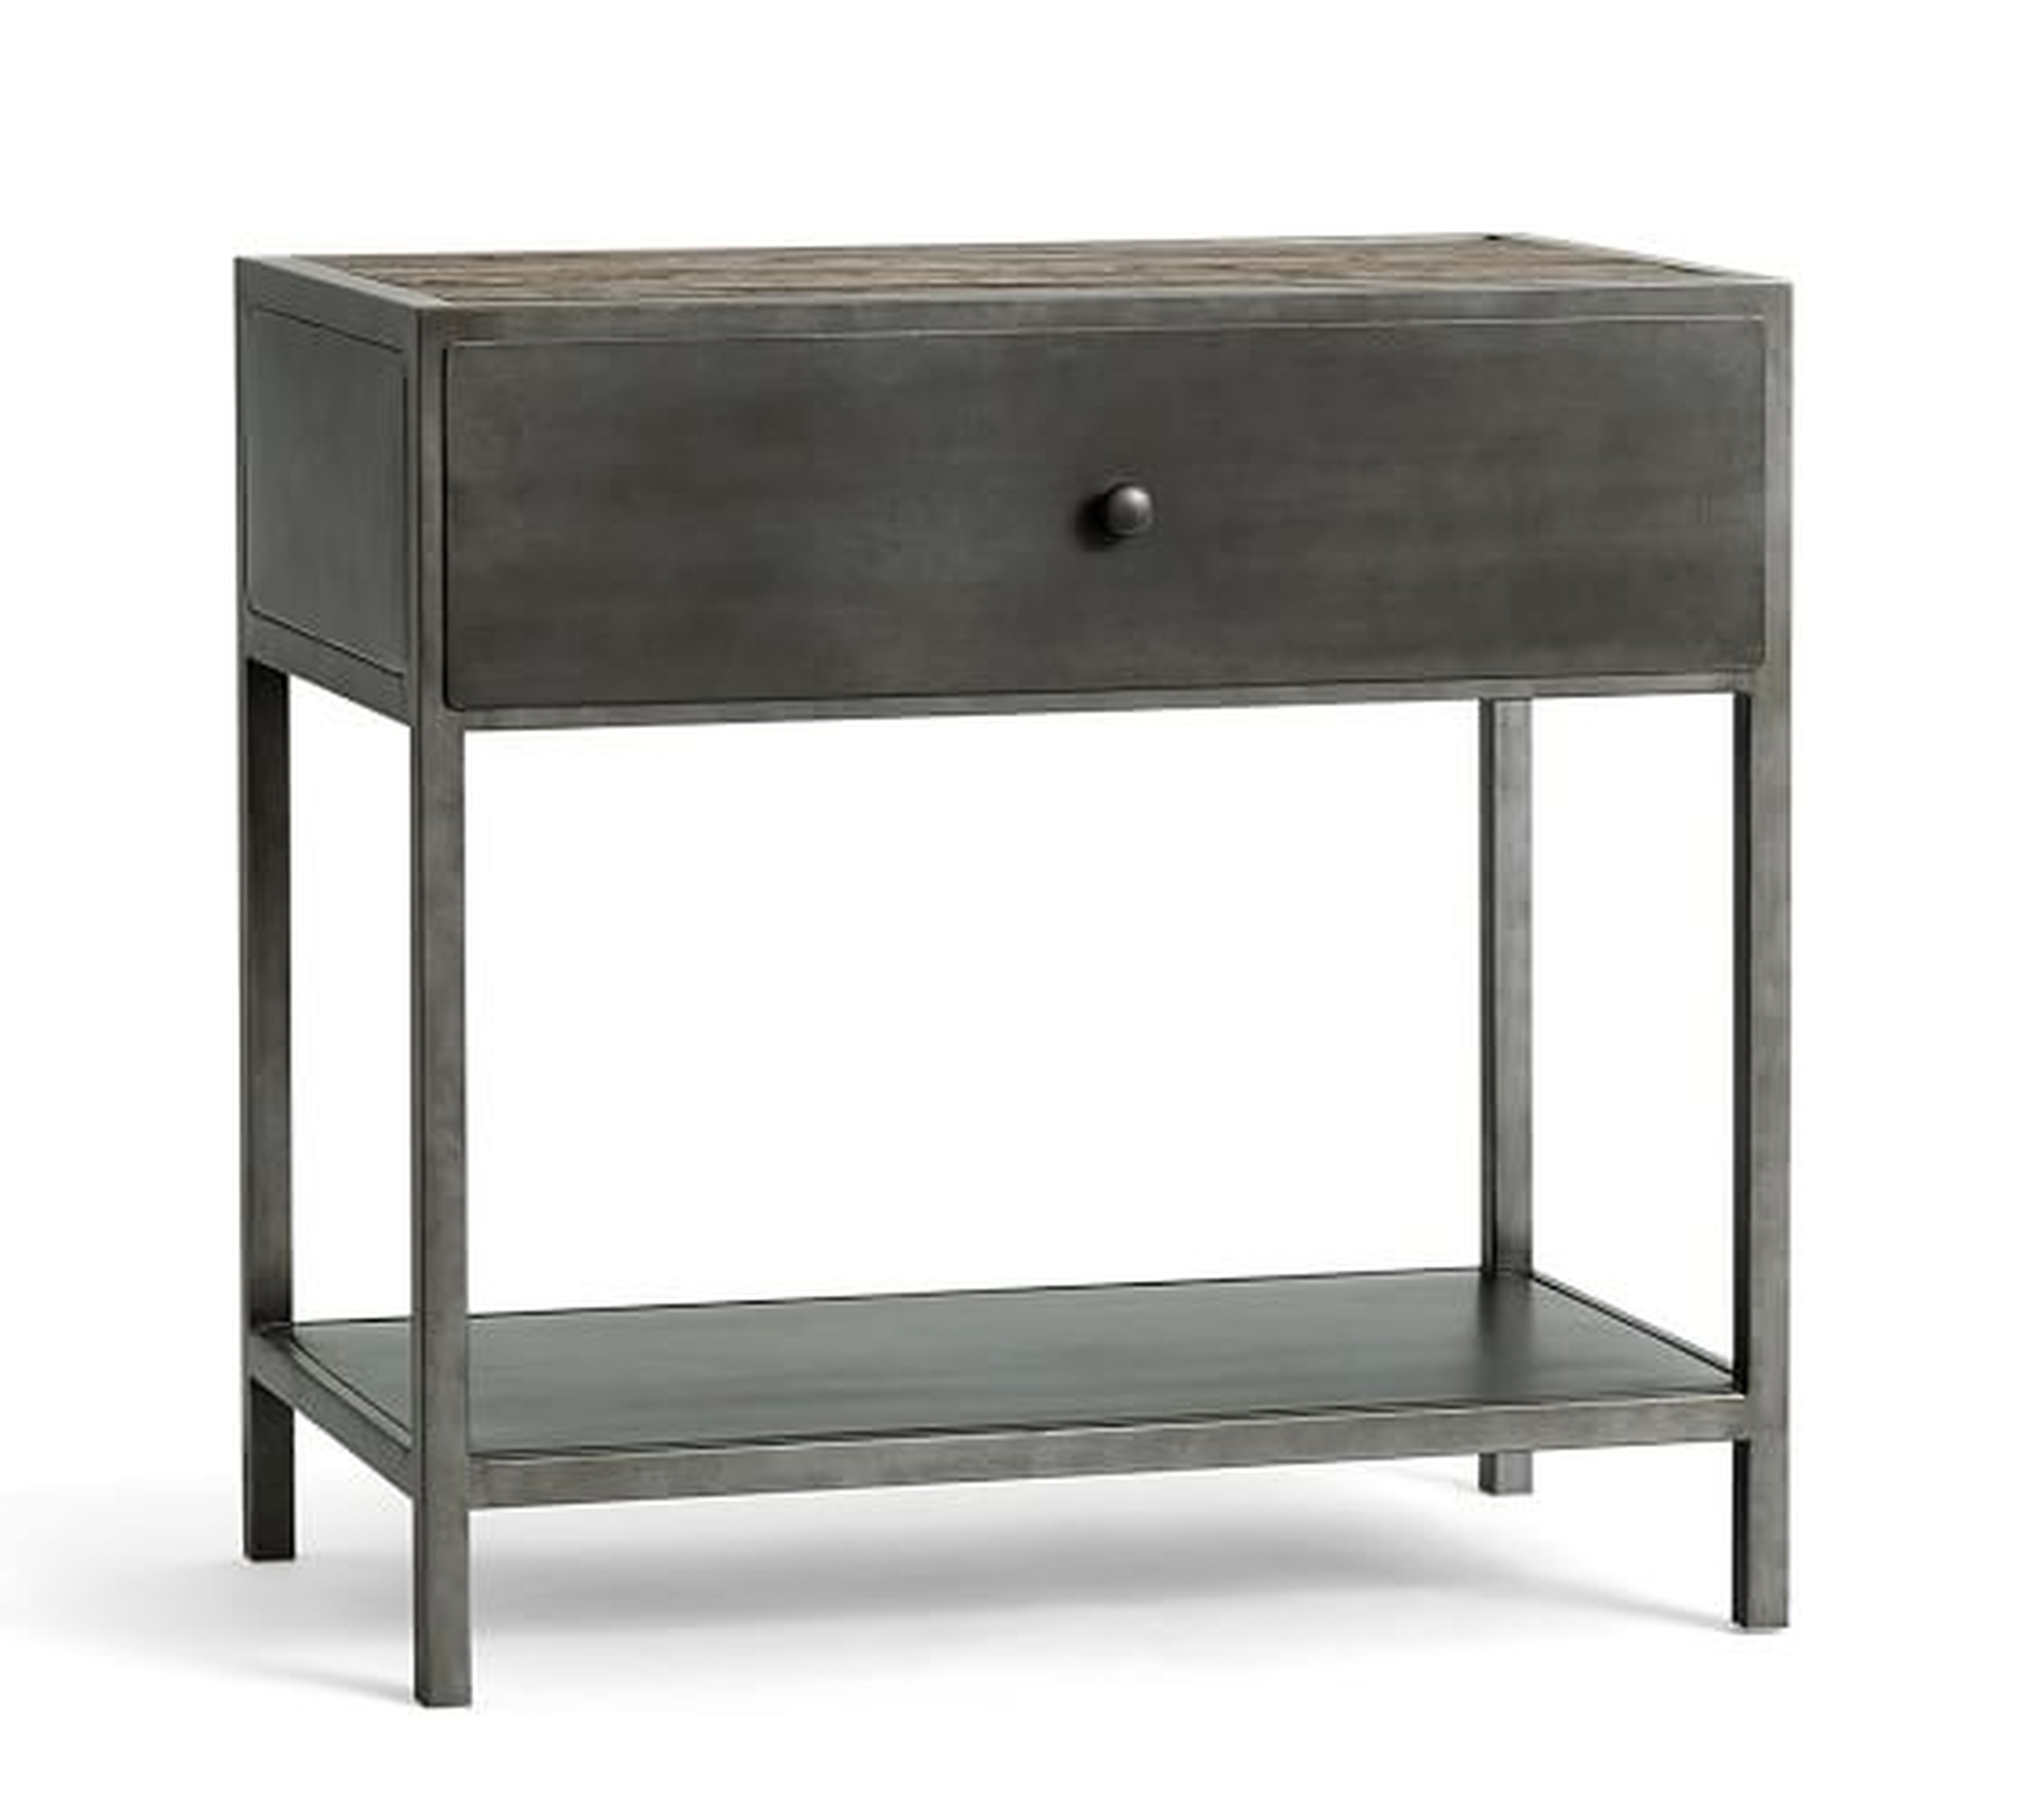 BIG DADDY'S ANTIQUES METAL BEDSIDE TABLE - Pottery Barn